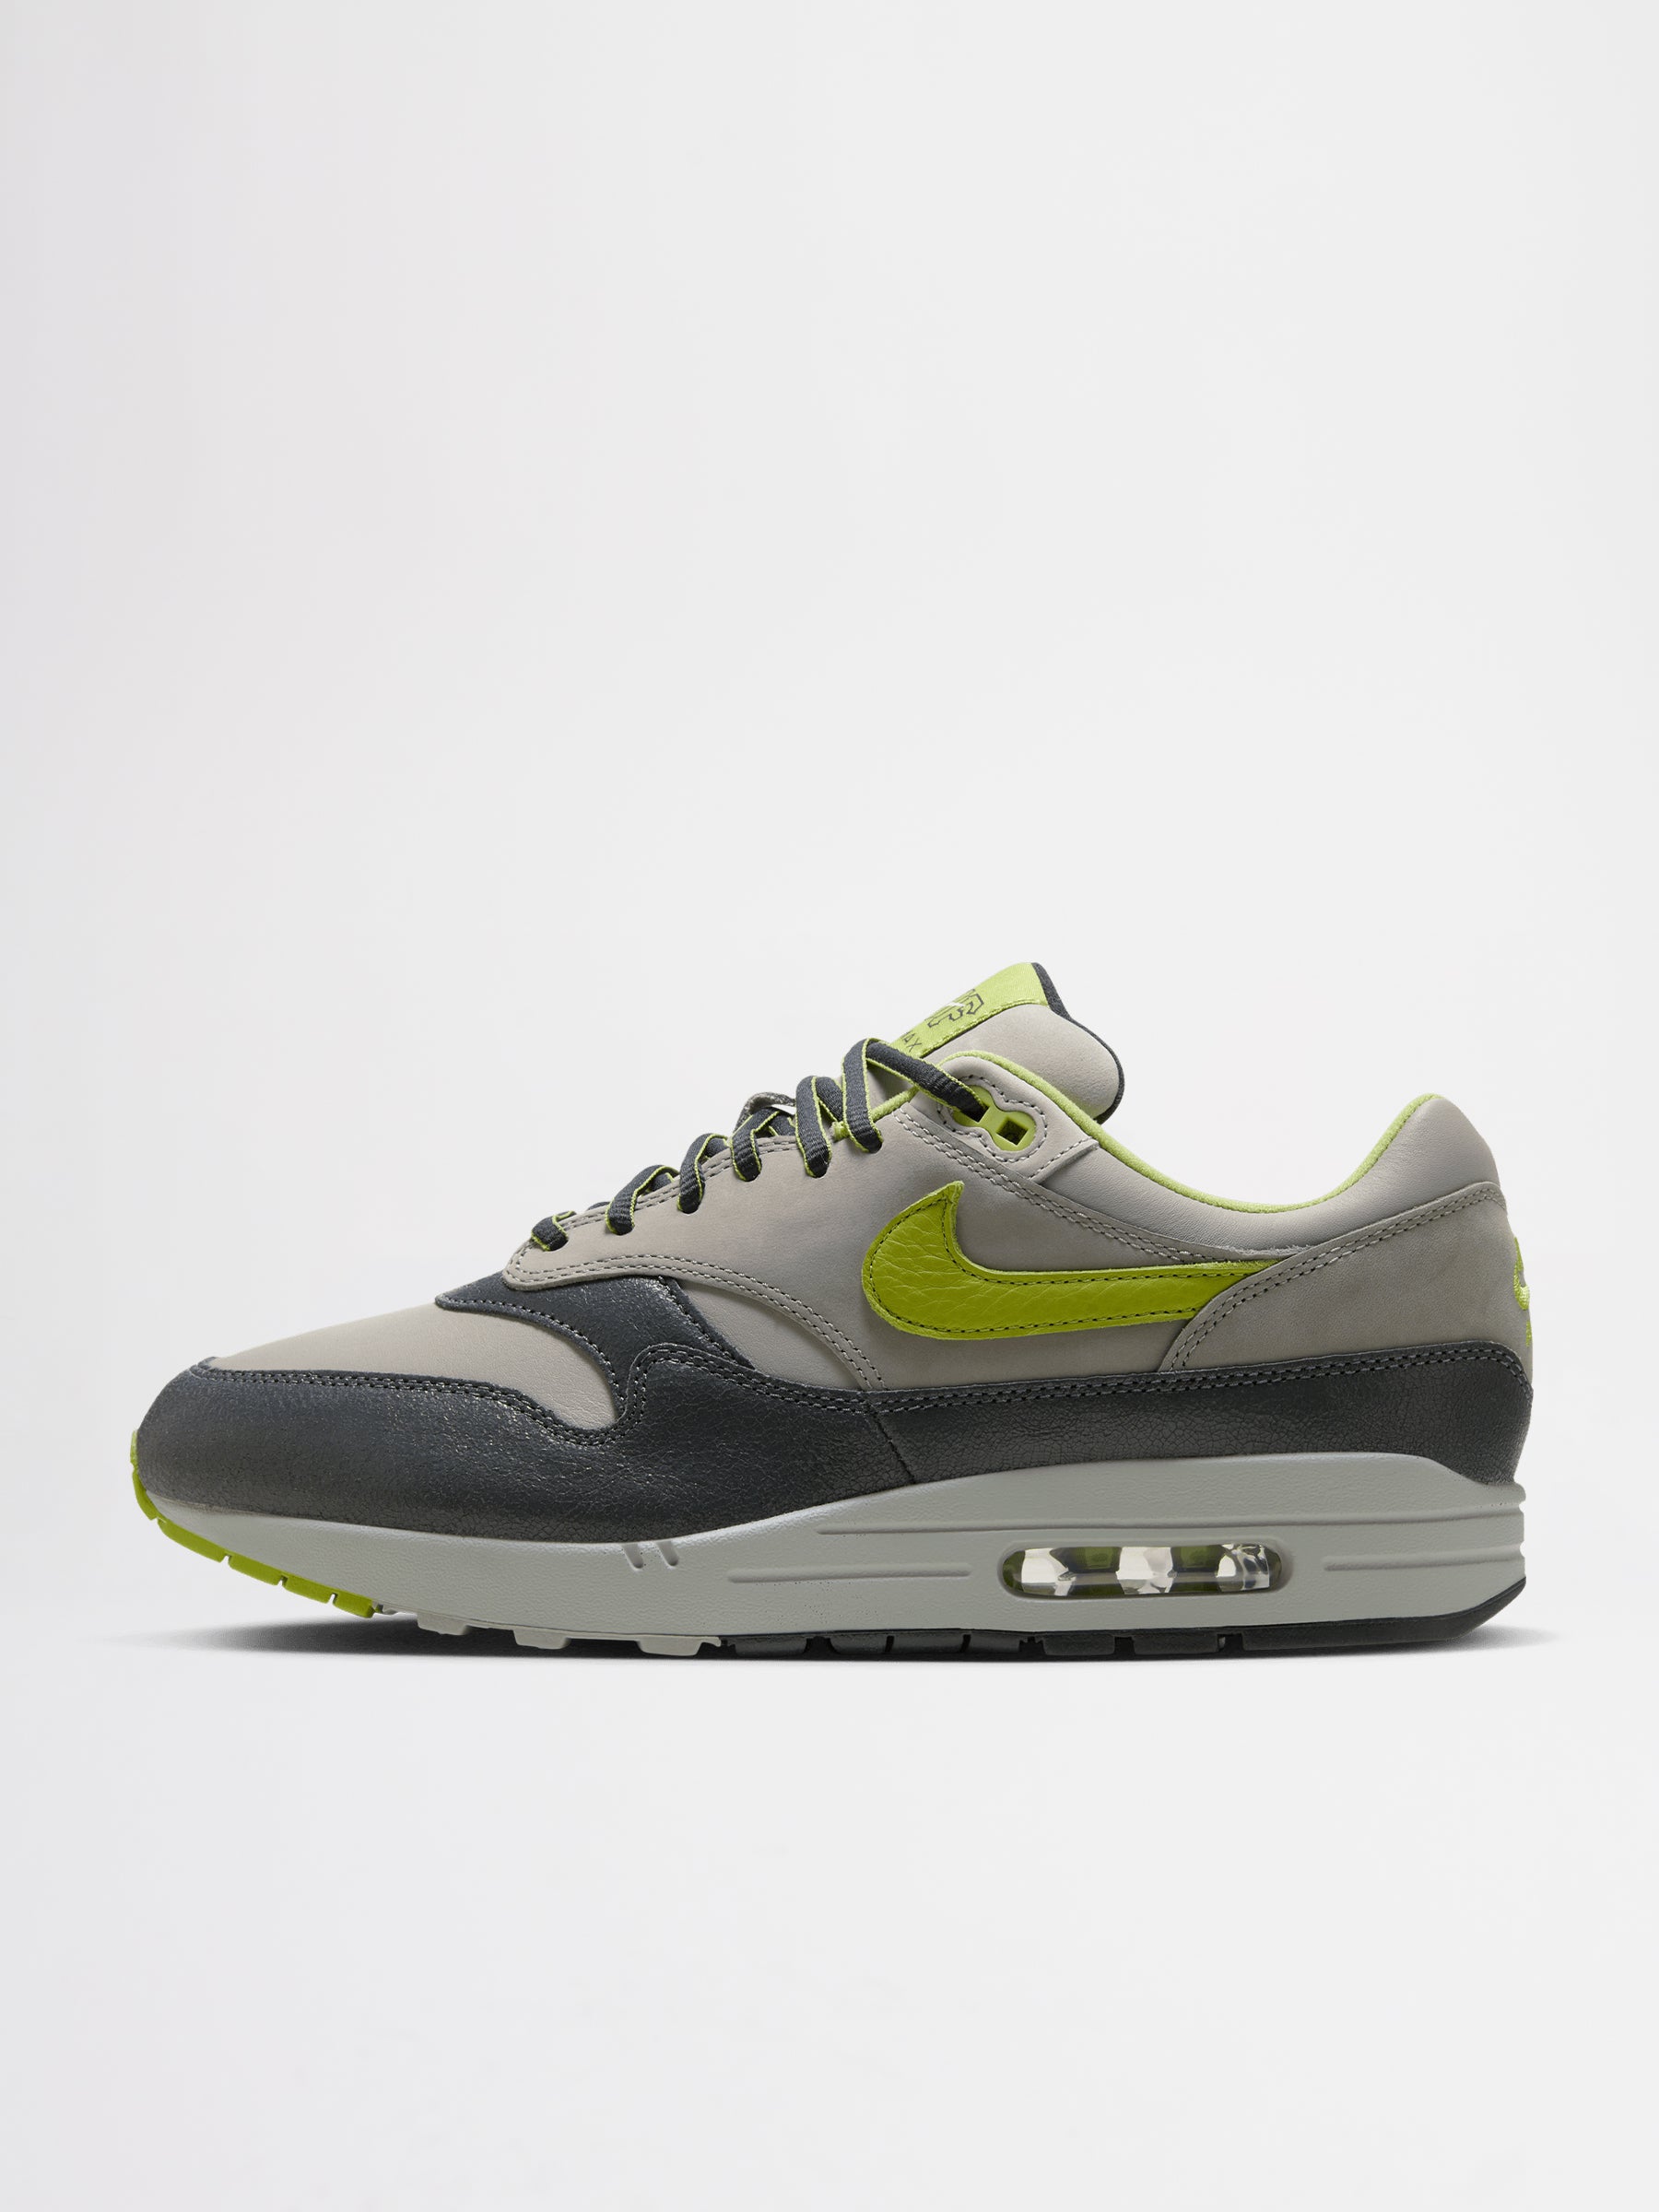 Nike x HUF Air Max 1 SP Anthracite / Pear